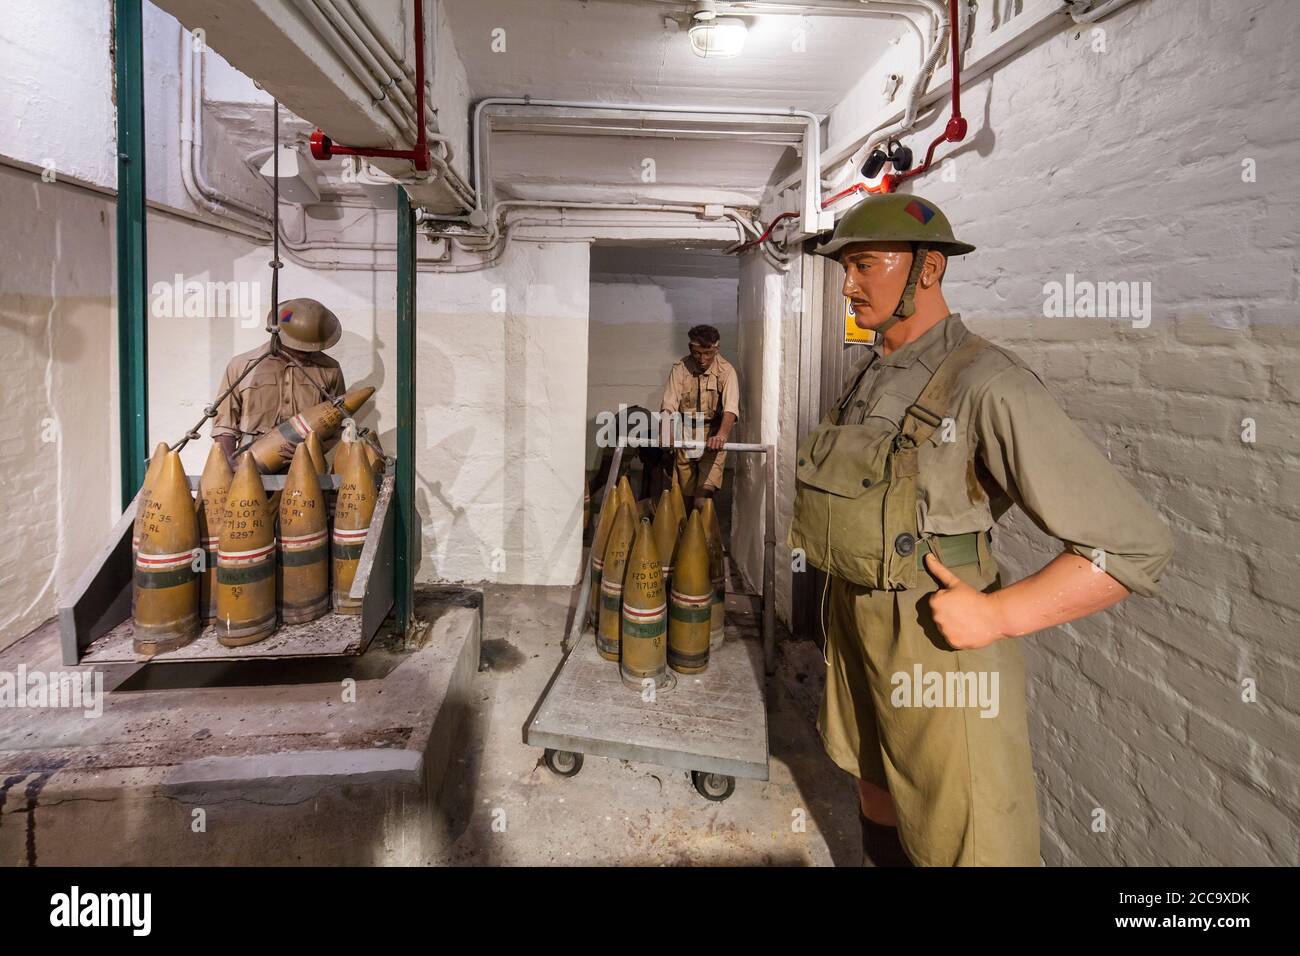 Enact of British soldiers moving and loading ammunition in a bunker. Fort Siloso, Sentosa, Singapore Stock Photo